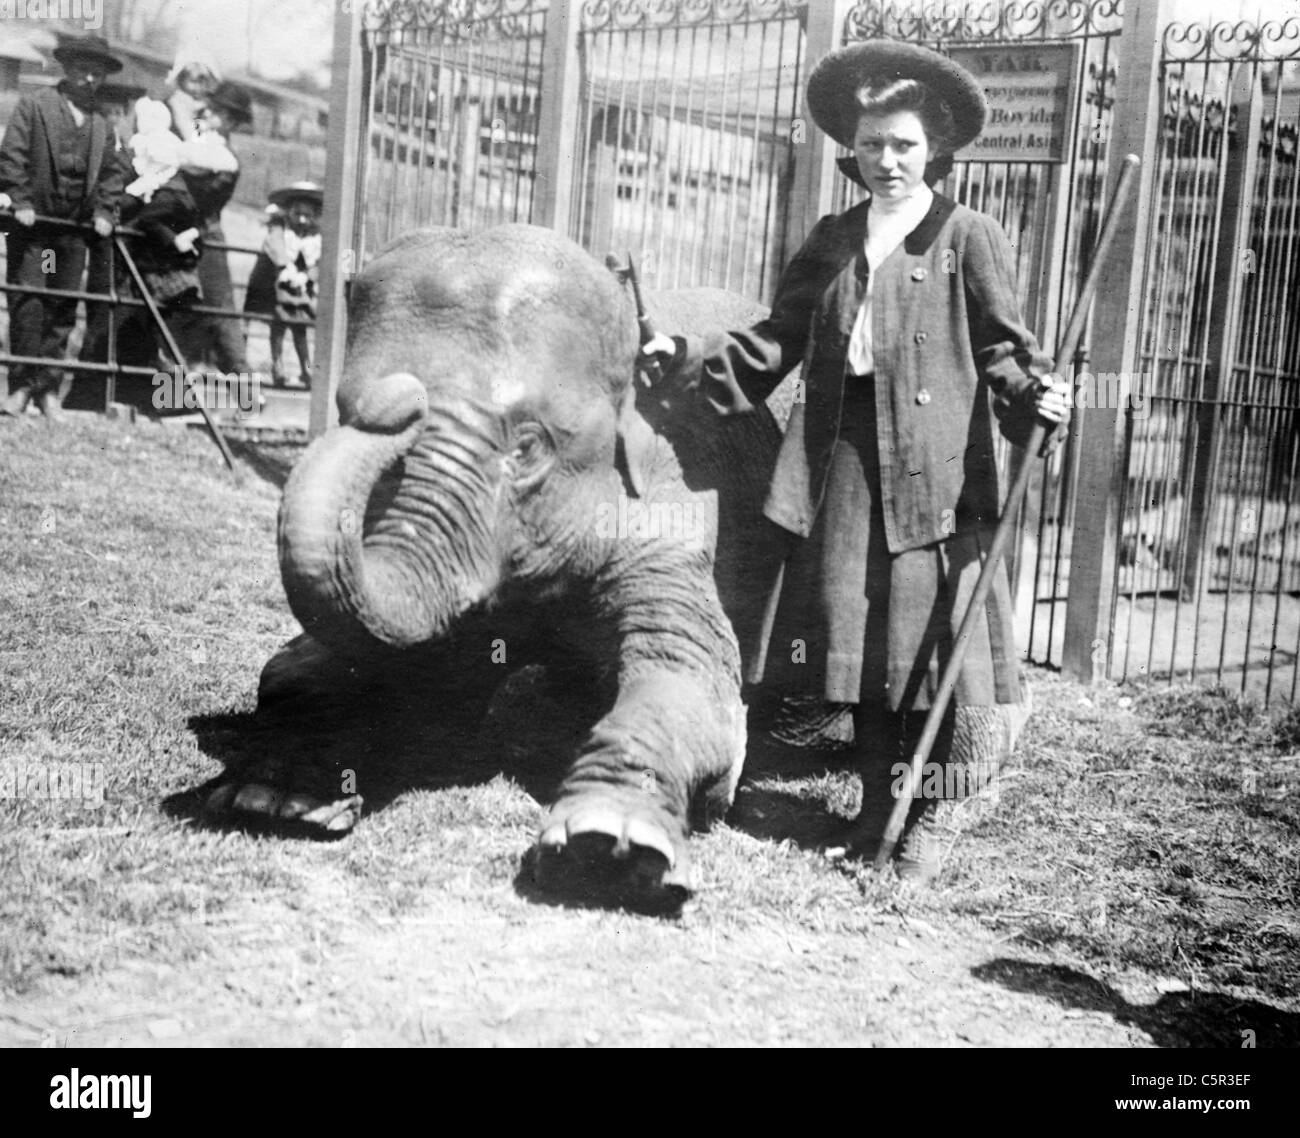 Hattie the elephant and Hattie Snyder, trainer, circa early 1900's Stock Photo